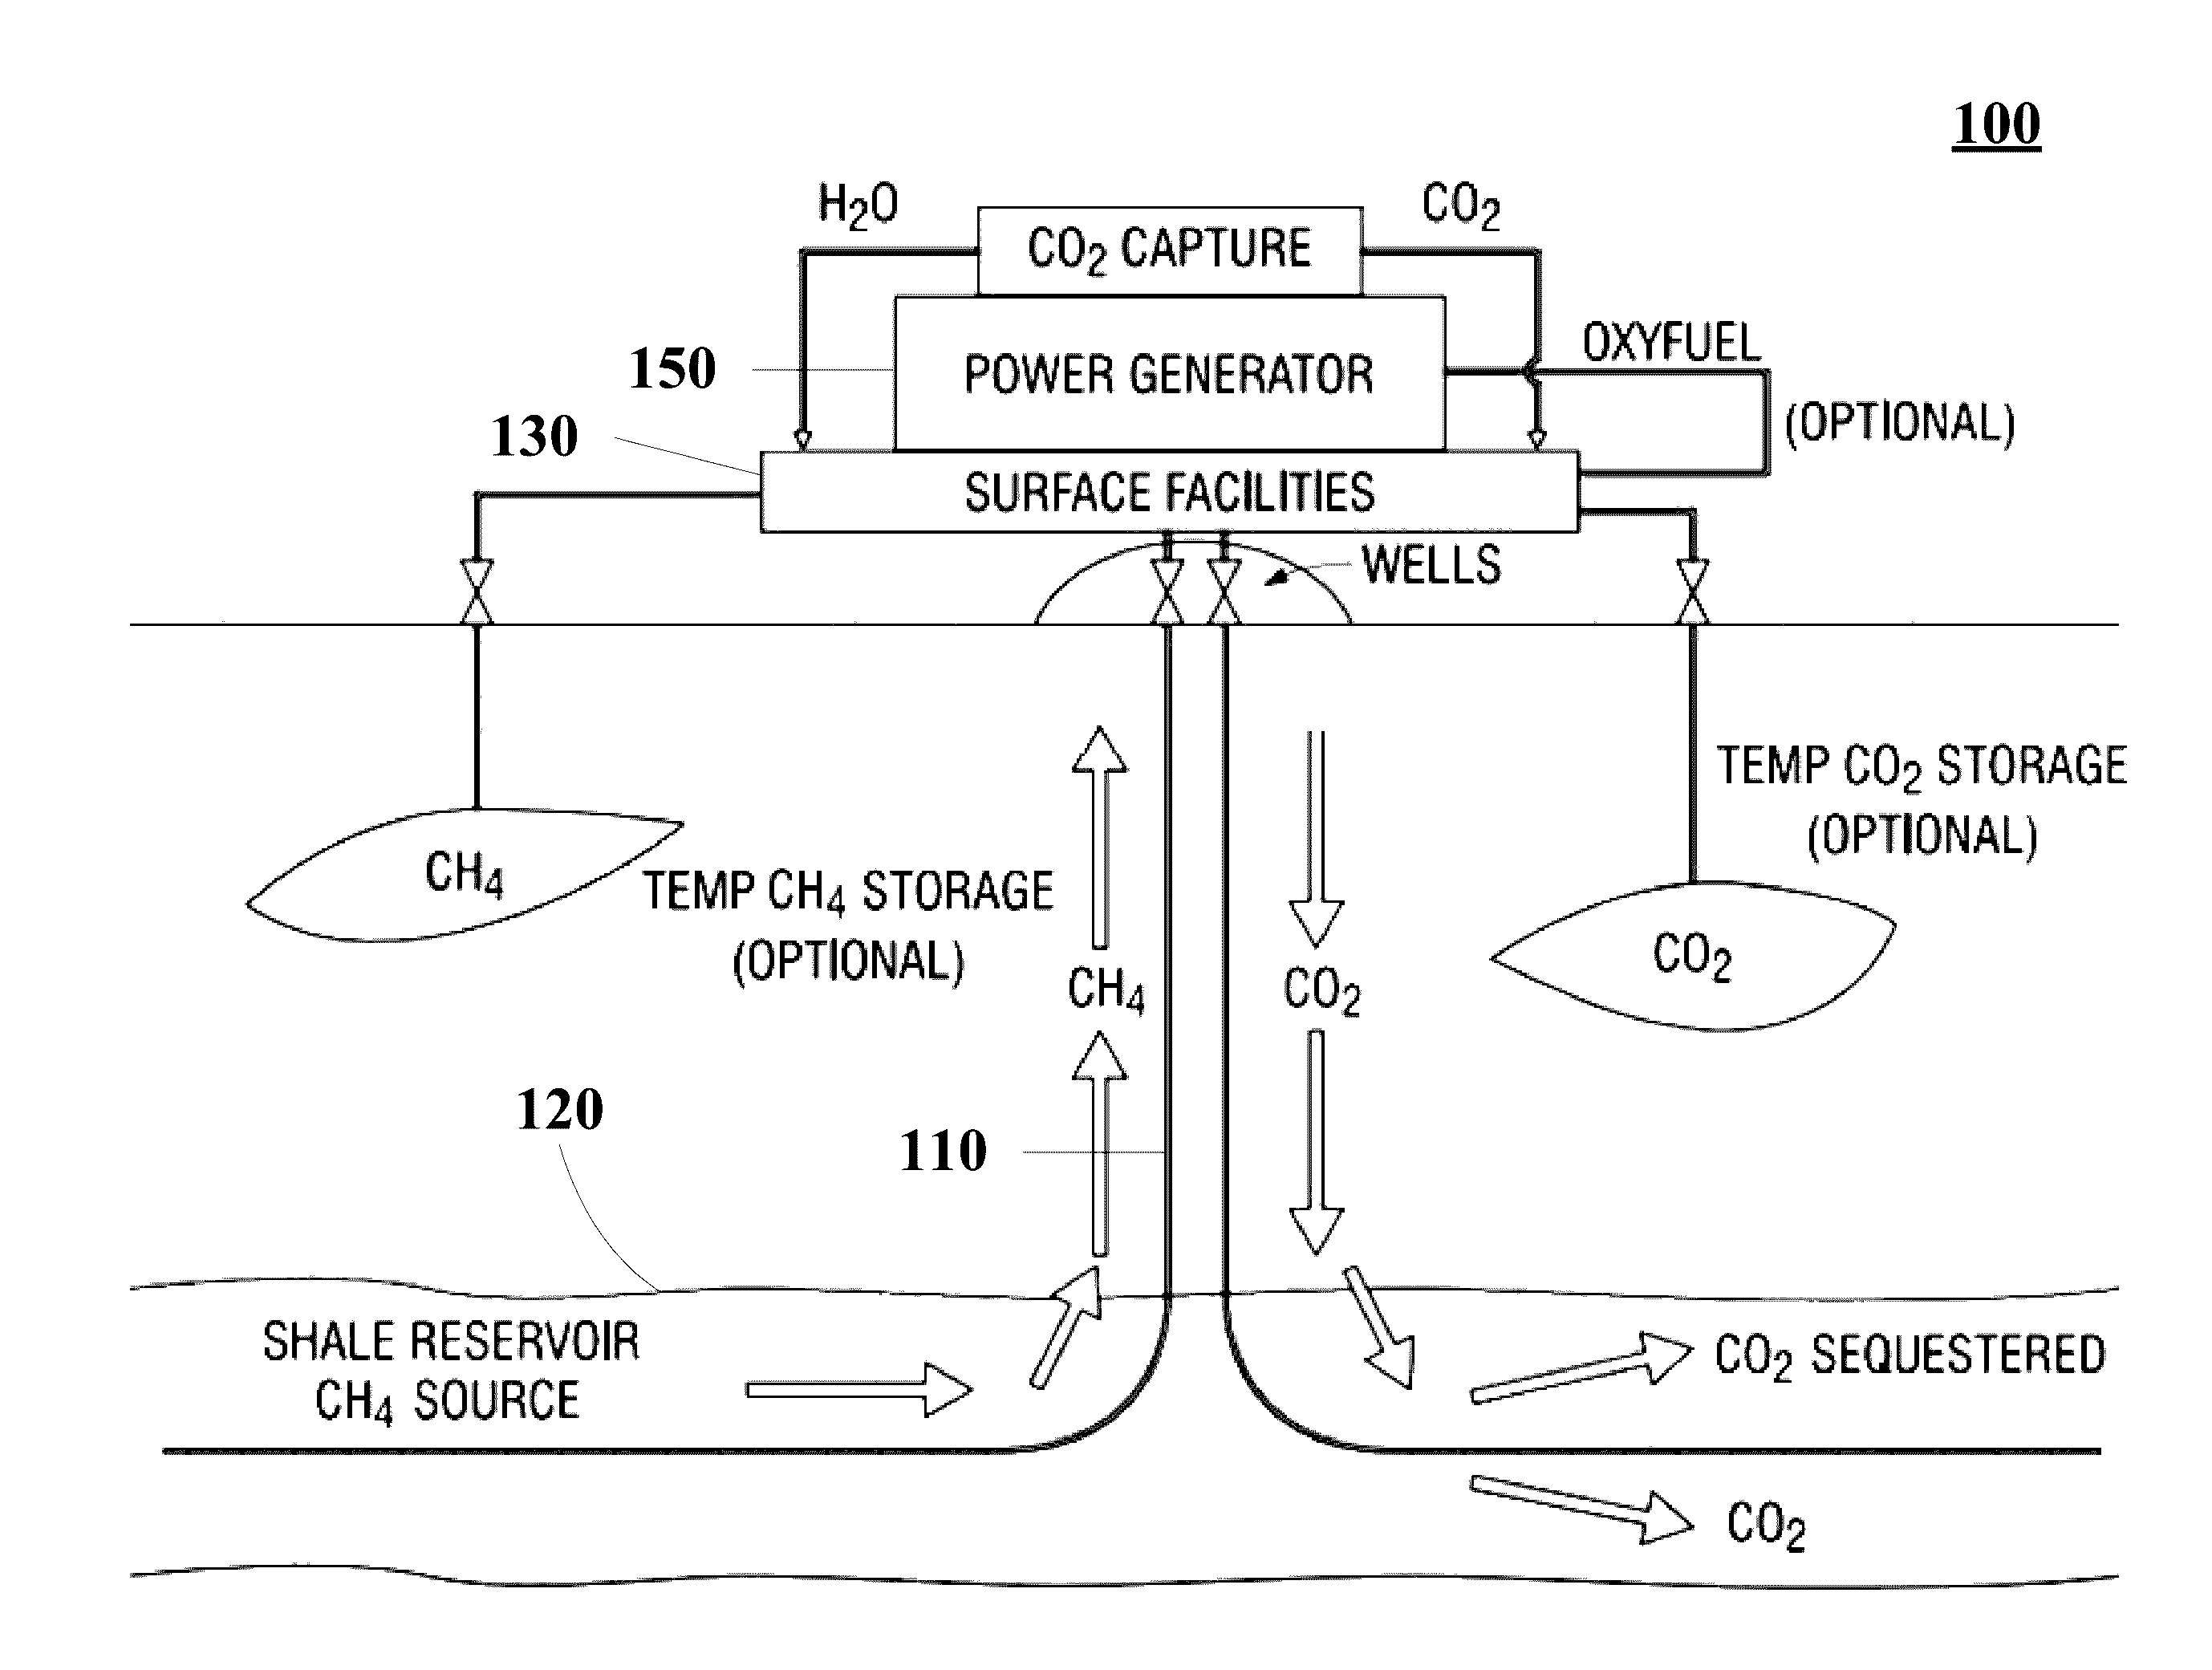 System and Method for Permanent Storage of Carbon Dioxide in Shale Reservoirs